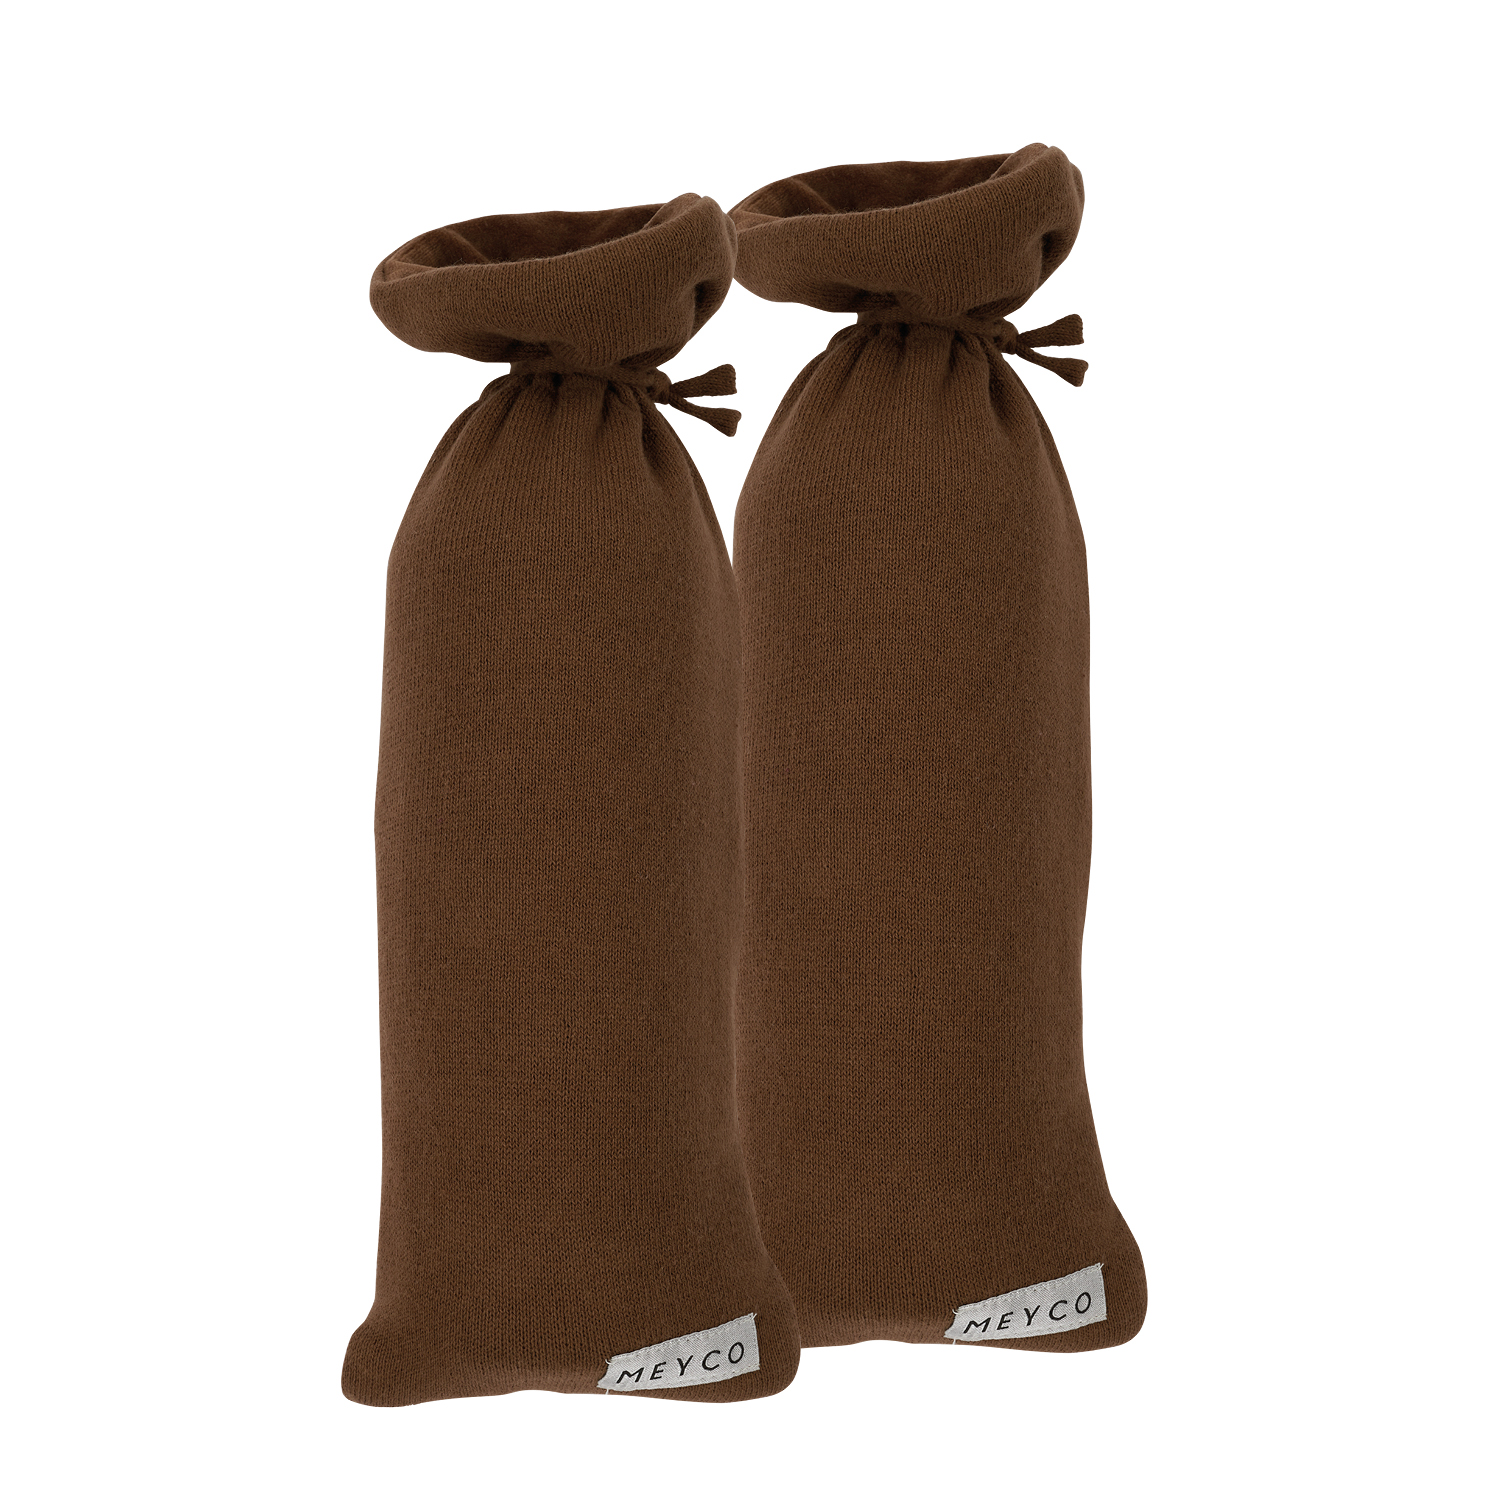 Hot water bottle cover 2-pack Knit Basic - chocolate